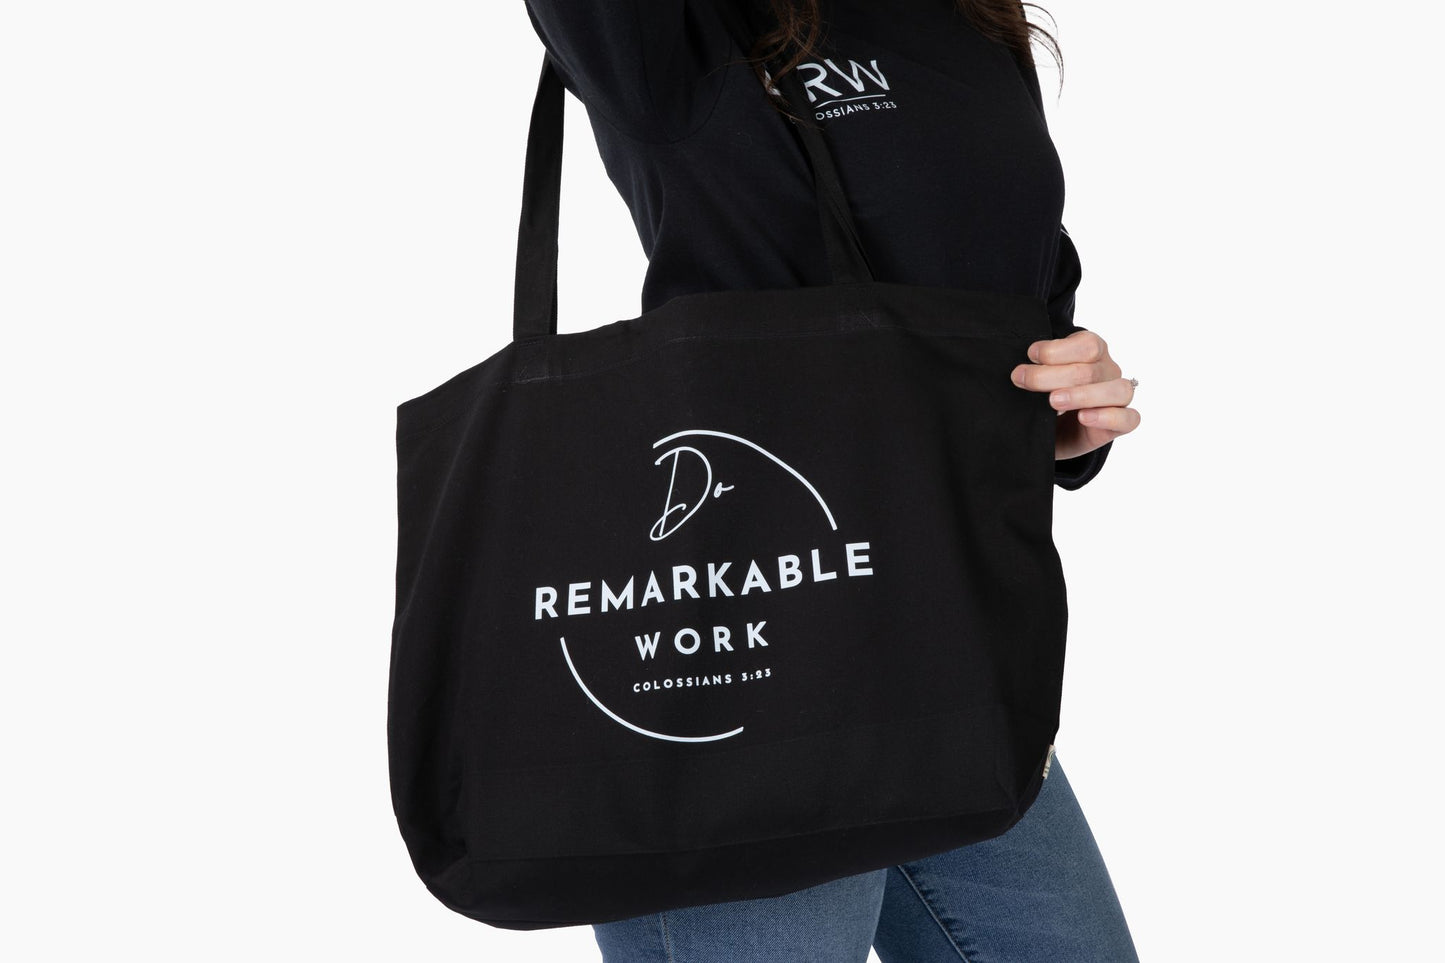 Eco Do Remarkable Work Large Tote